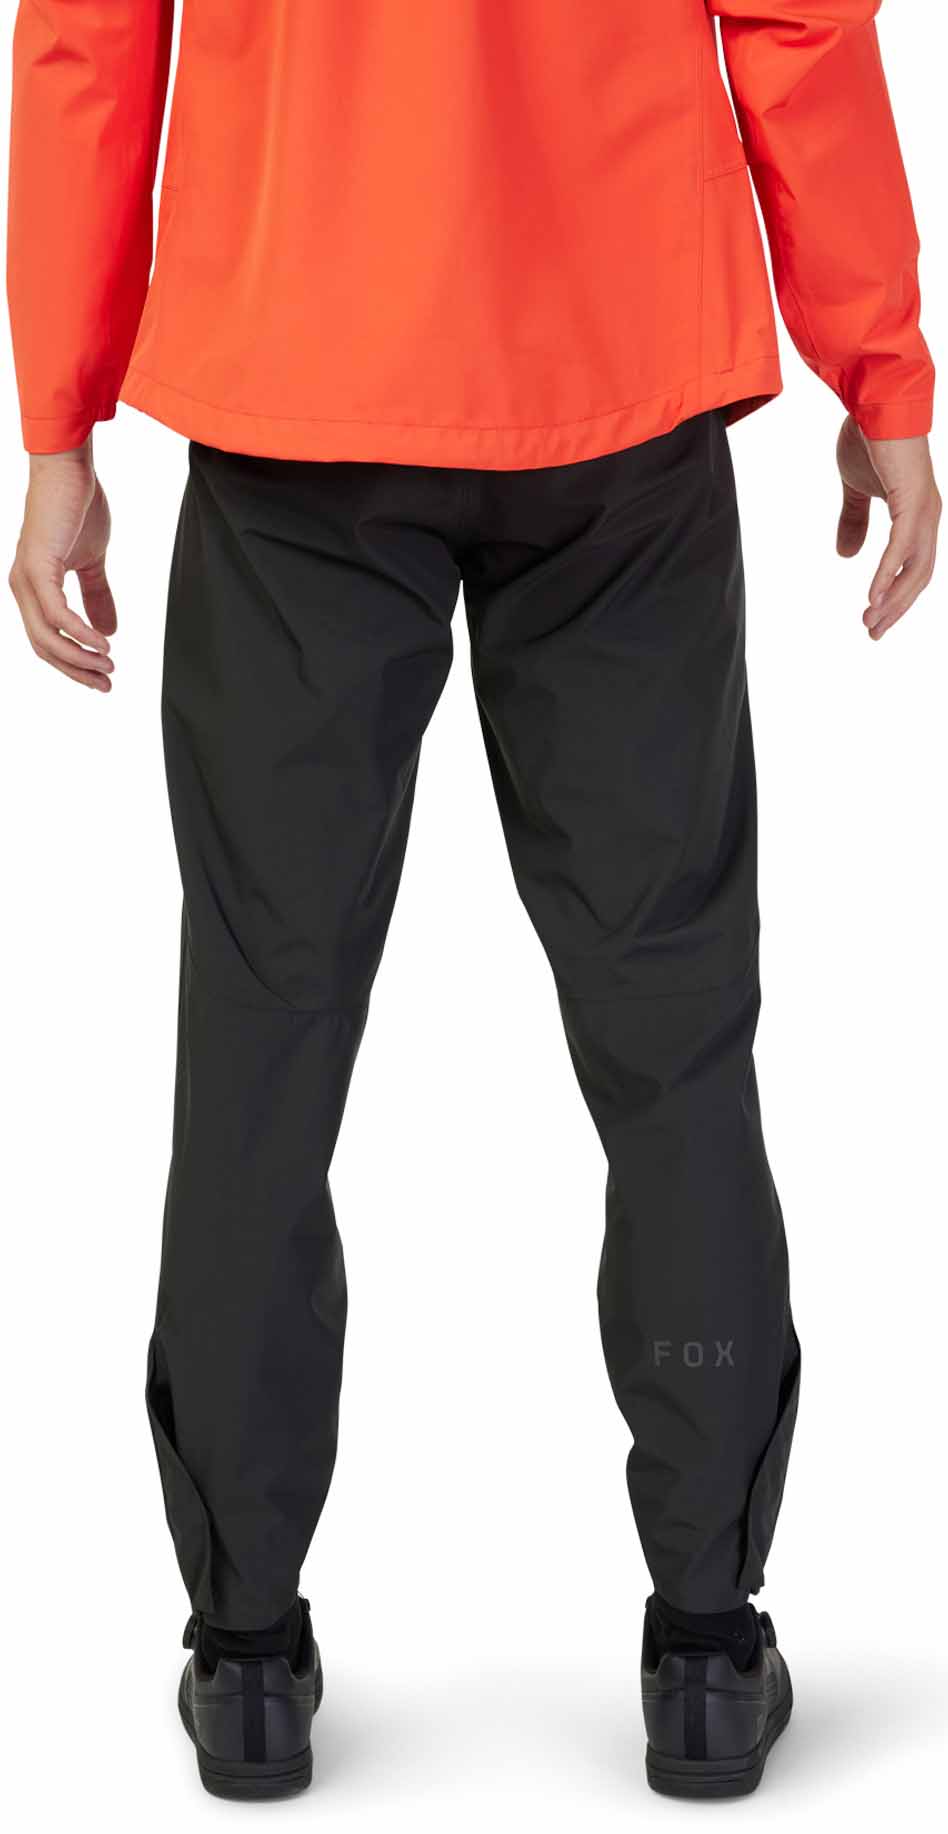 Cycling trousers